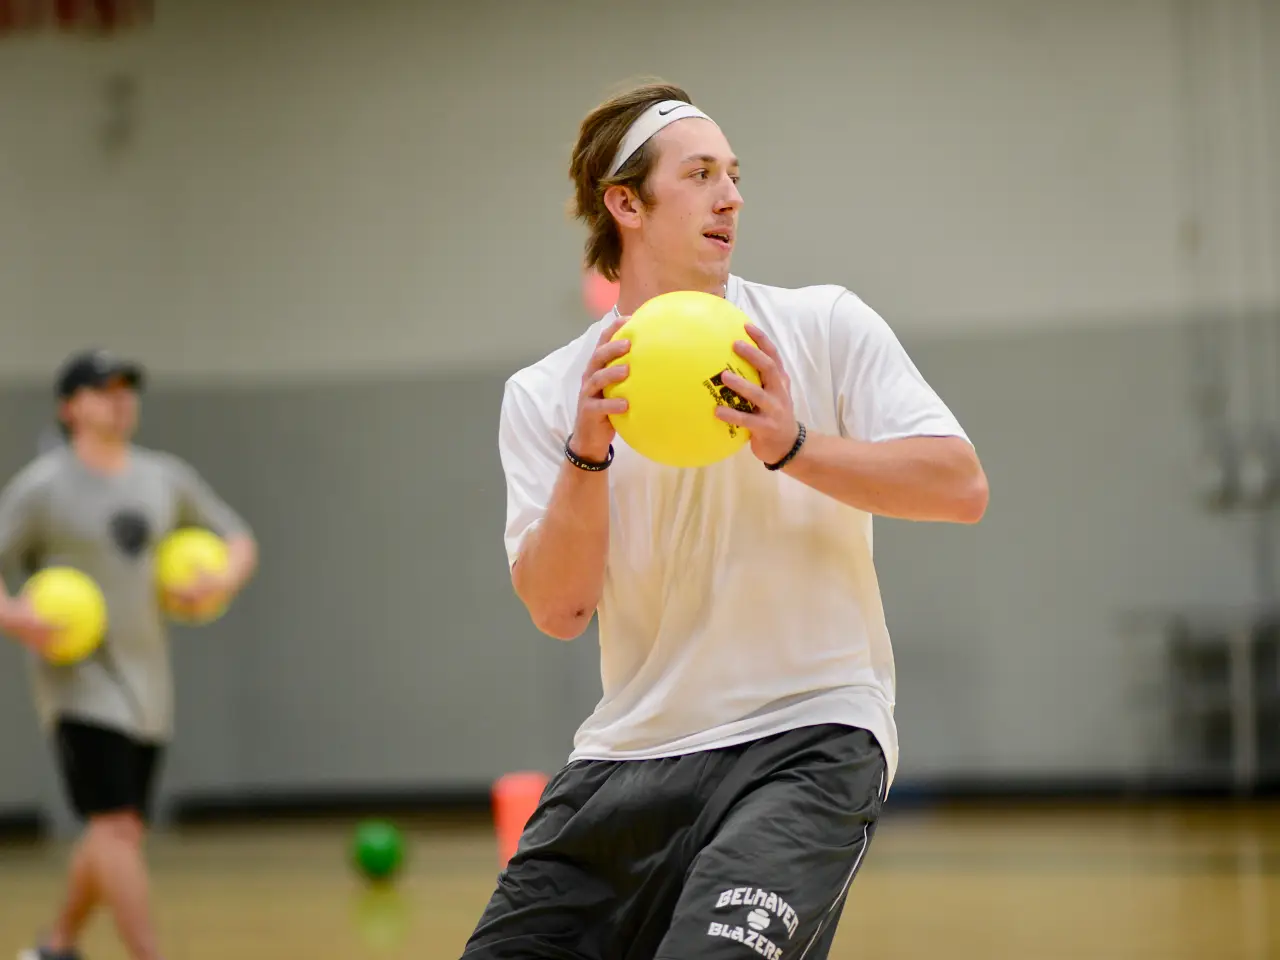 person playing dodgeball